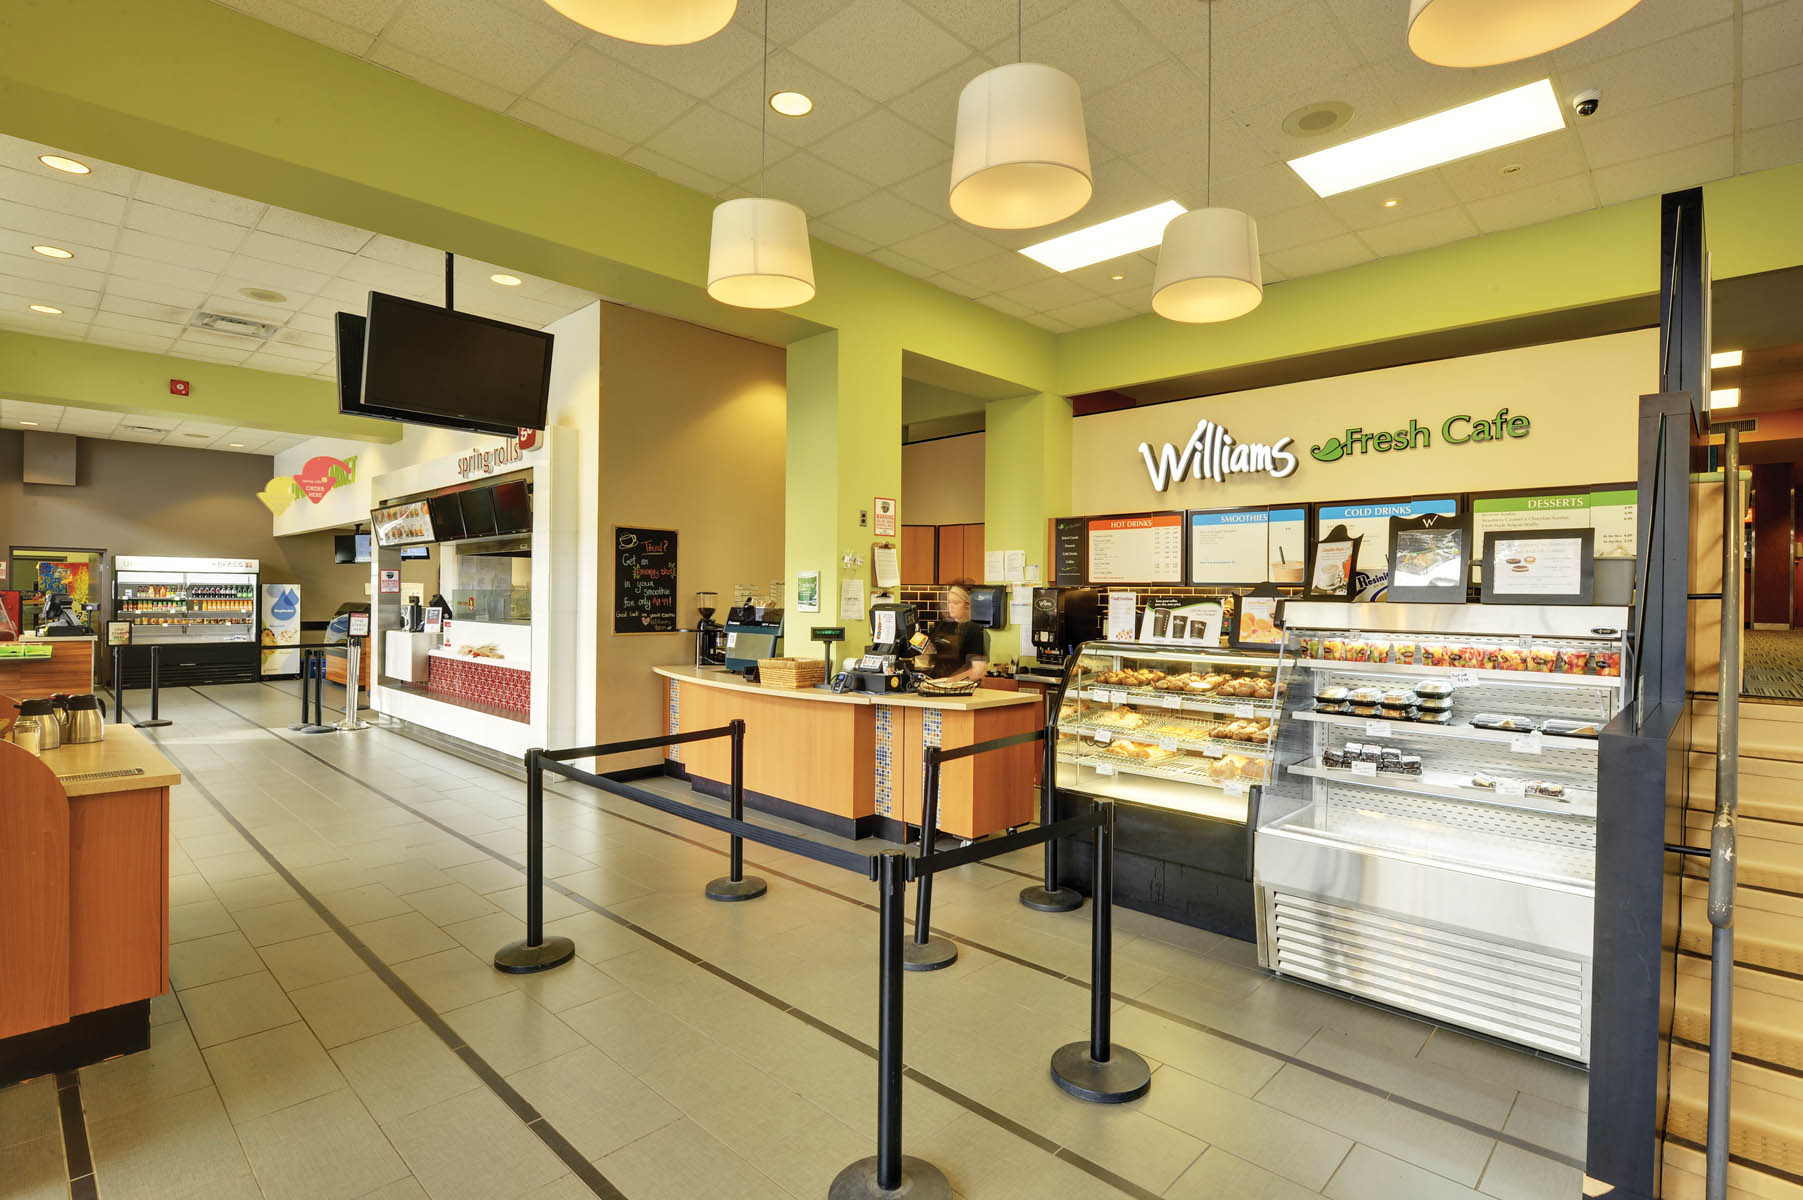 Williams Fresh Cafe counter with pastry display case, light green walls and white pendant light fixtures